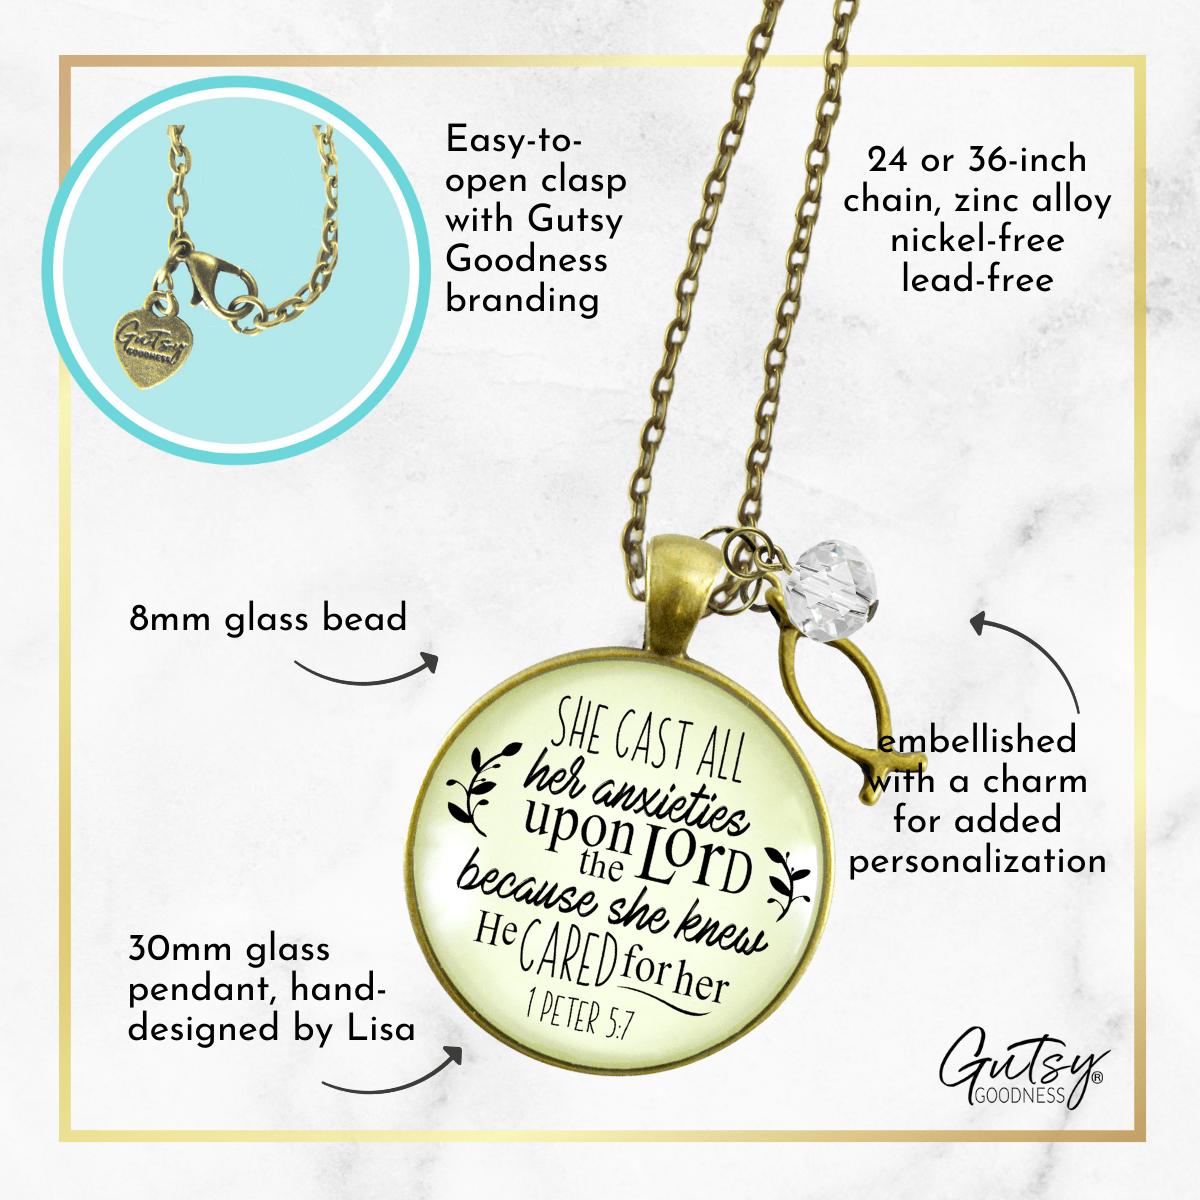 Gutsy Goodness Christian Necklace She Cast Anxieties Bible Word Jewelry Fish Charm - Gutsy Goodness Handmade Jewelry;Christian Necklace She Cast Anxieties Bible Word Jewelry Fish Charm - Gutsy Goodness Handmade Jewelry Gifts